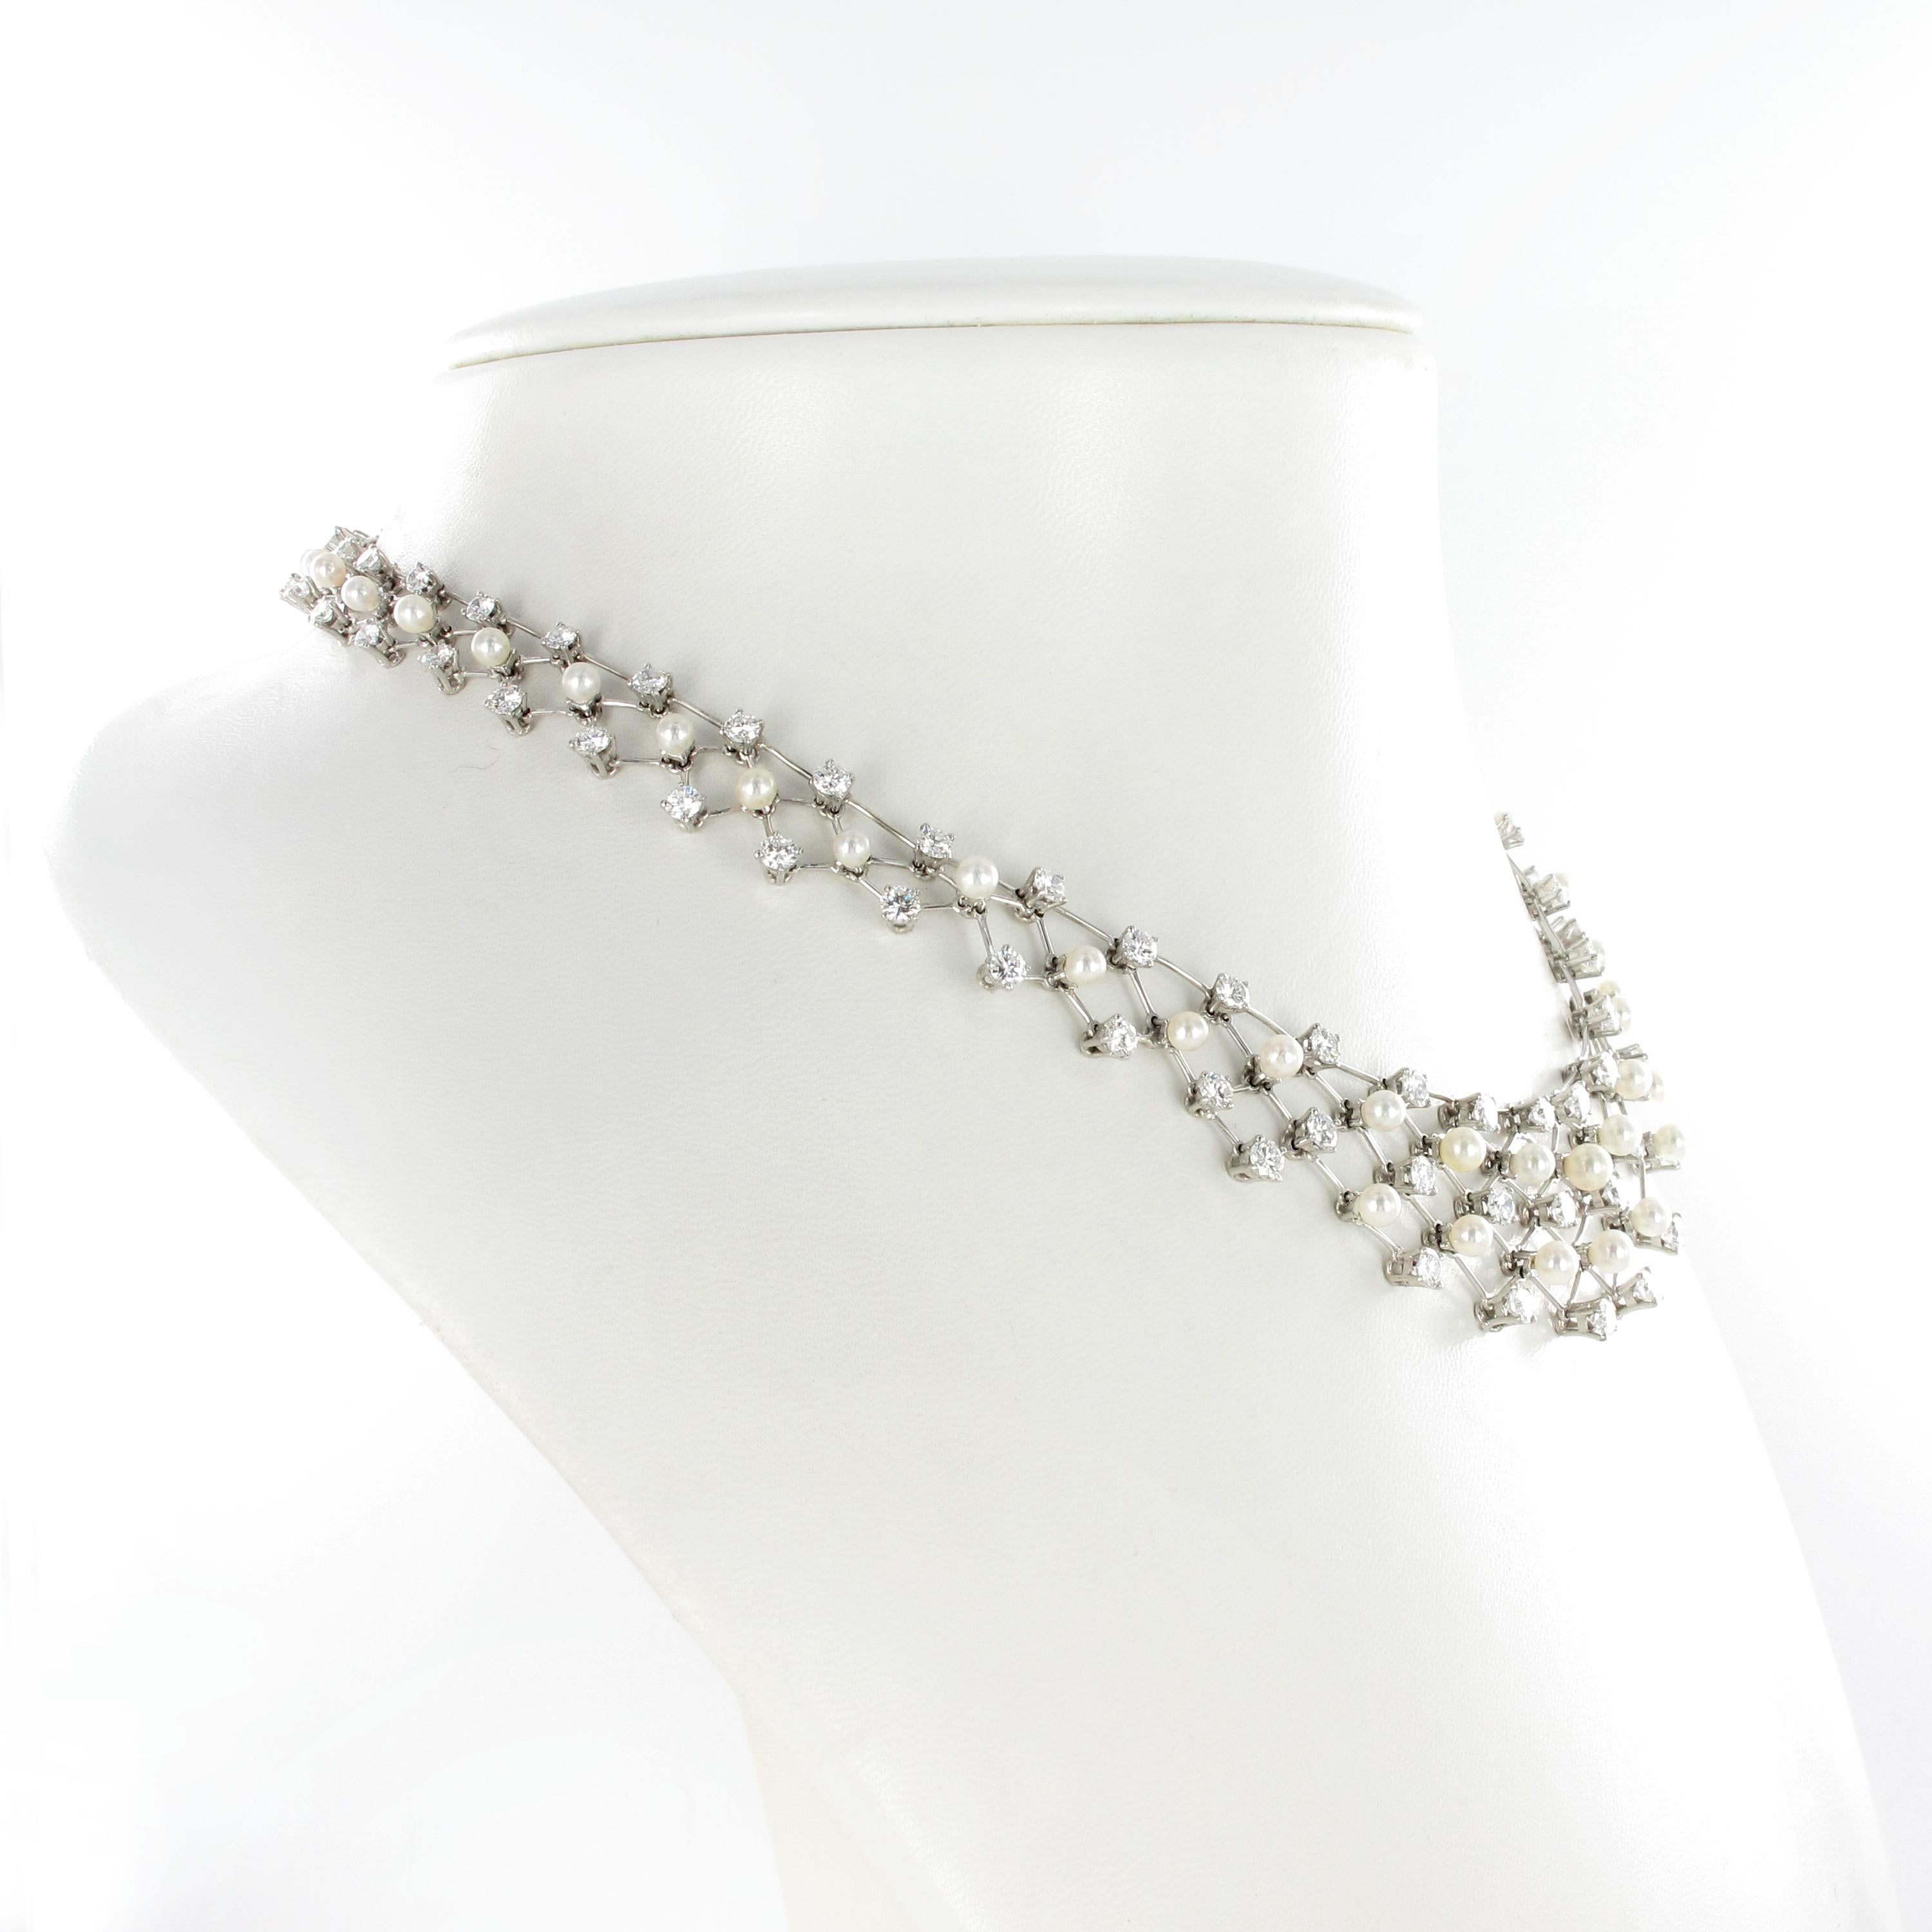 Brilliant Cut Diamond and Akoya Cultured Pearls Necklace in 950 Platinum For Sale